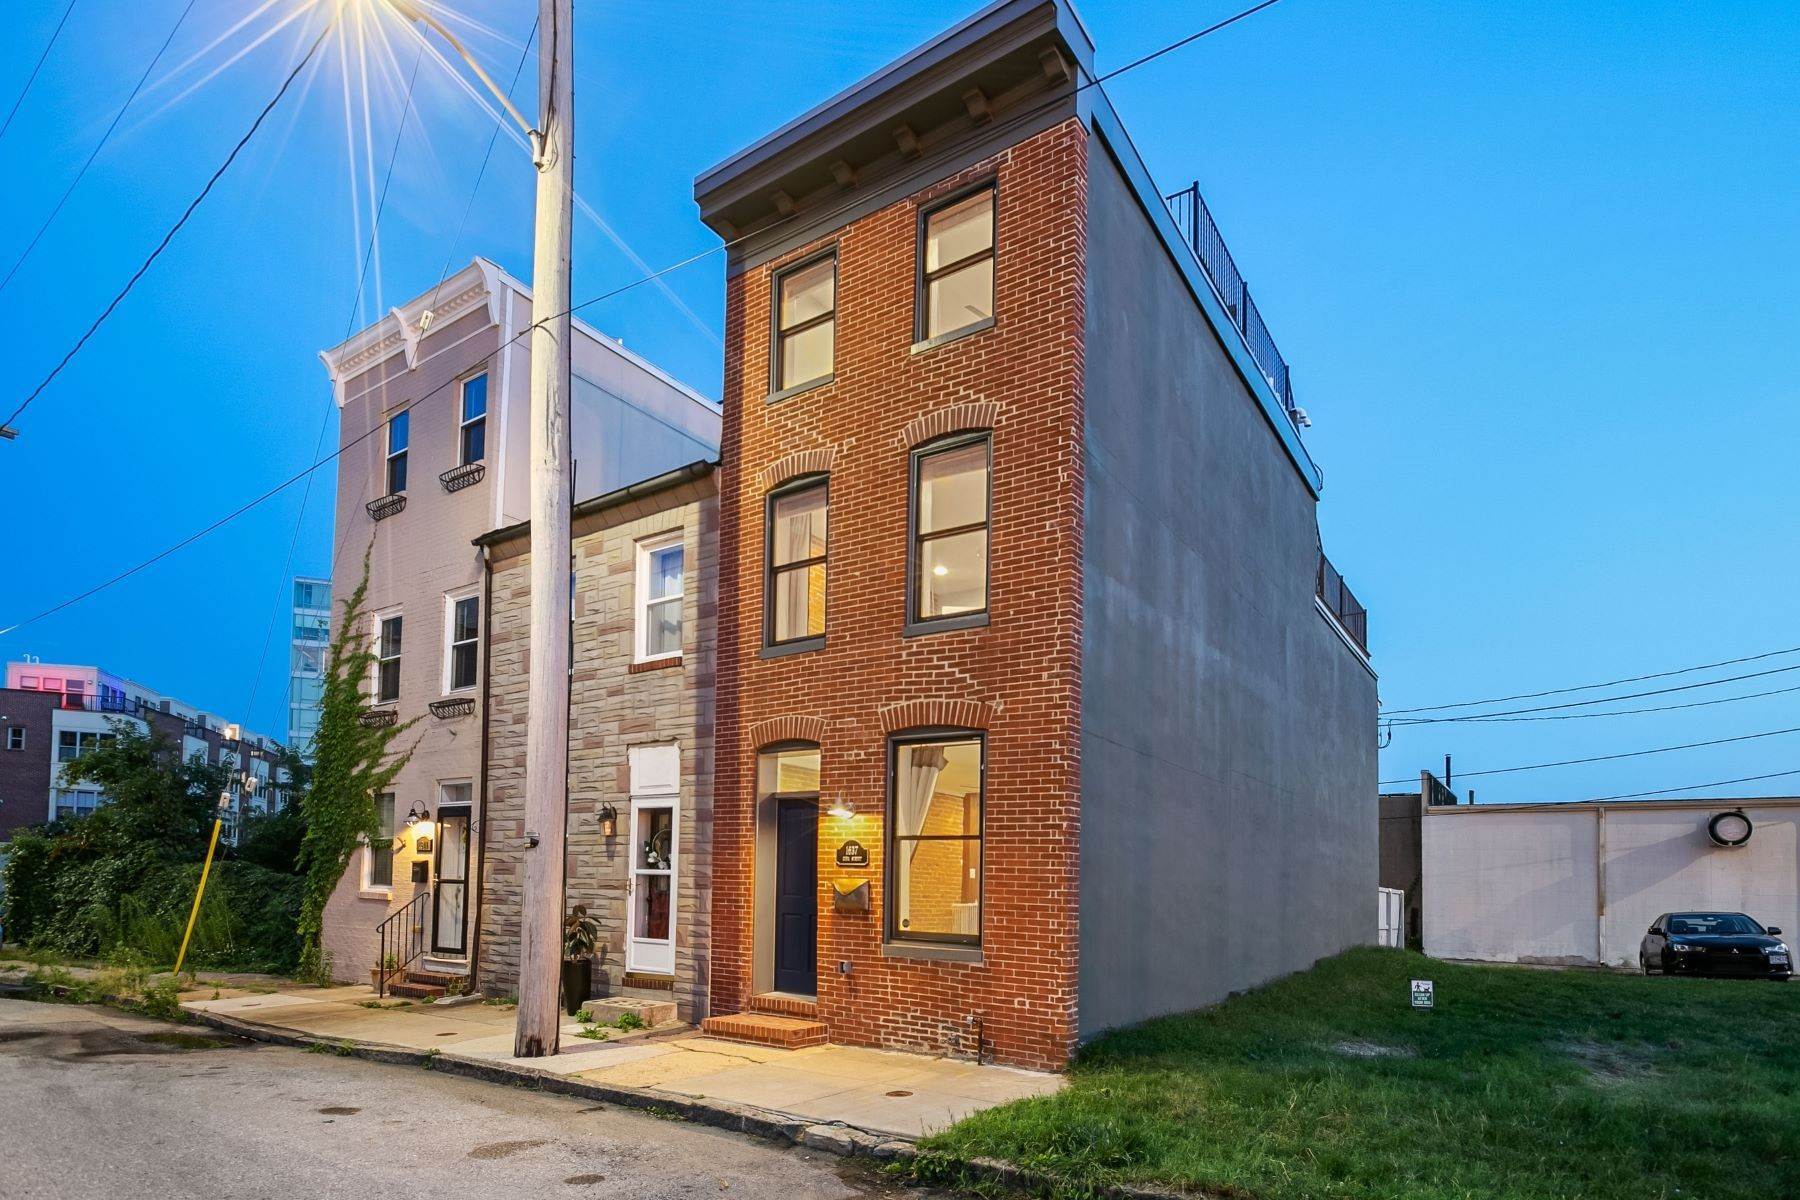 4. Townhouse at Locust Point Townhome 1637 Cuba Street Baltimore, Maryland 21230 United States